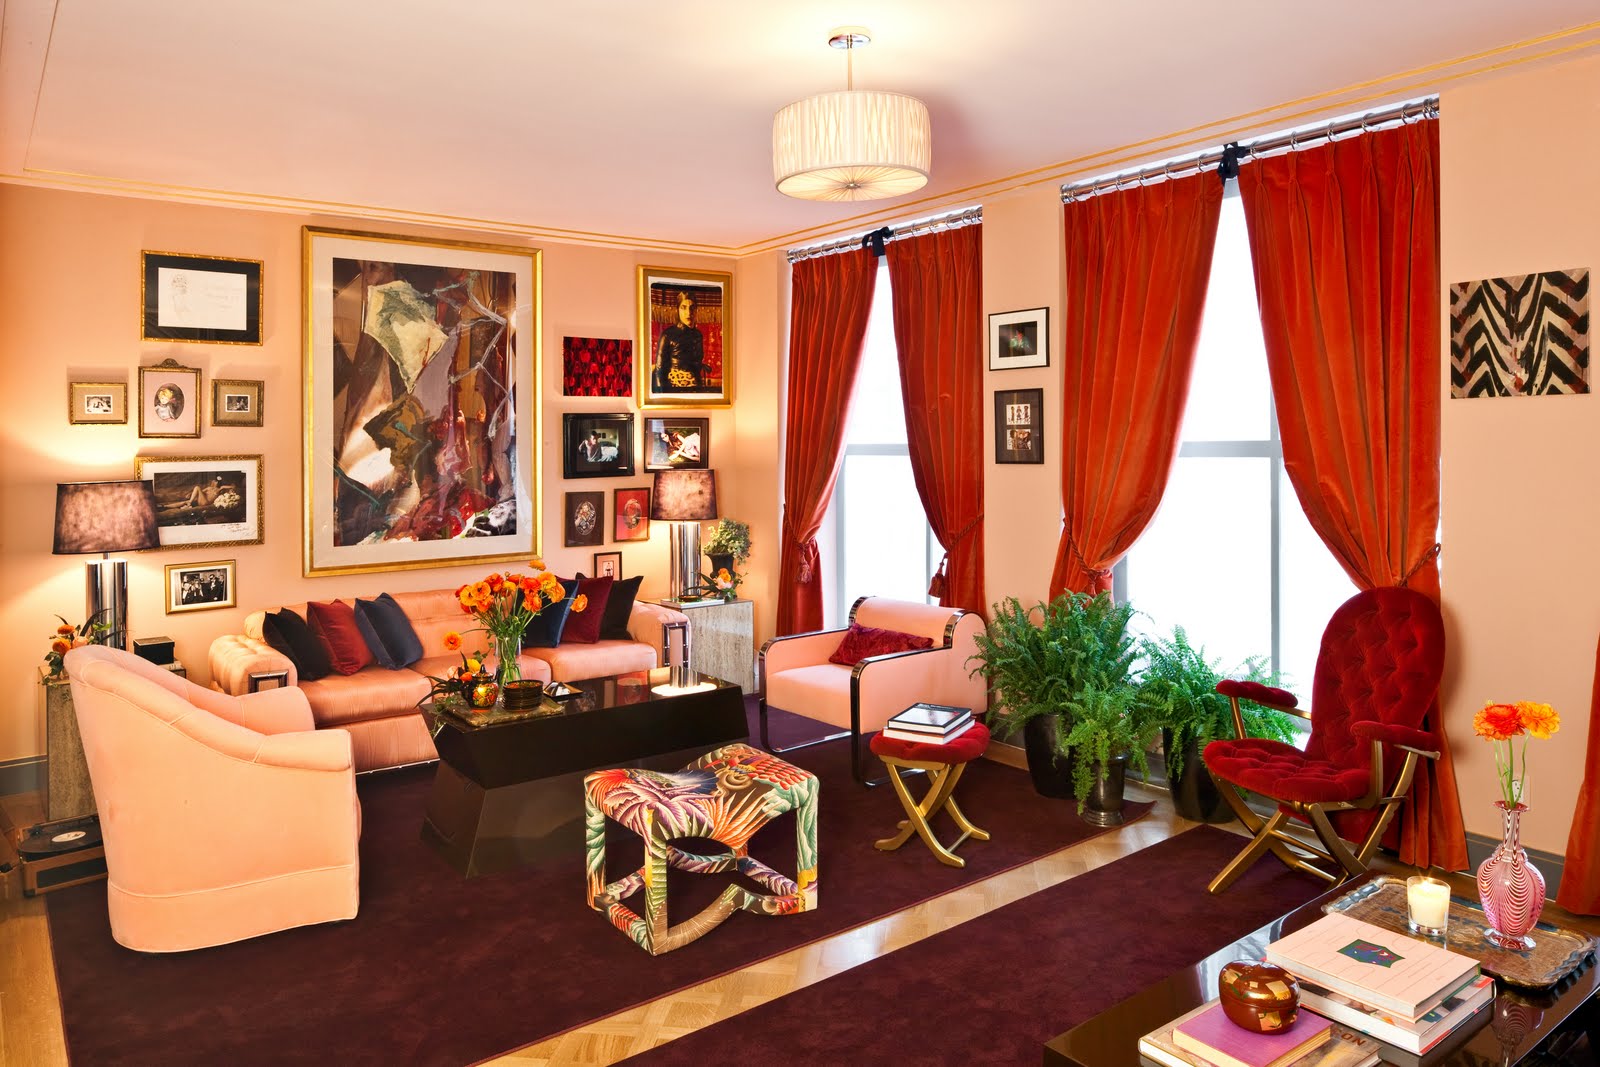 Living Room Tie Inspiring Living Room With Red Tie Back Living Room Curtains Furnished With Sofa And Hodgepodge Chairs Completed With Black Table On Purple Rug Living Room Awesome Living Room Curtains Designs